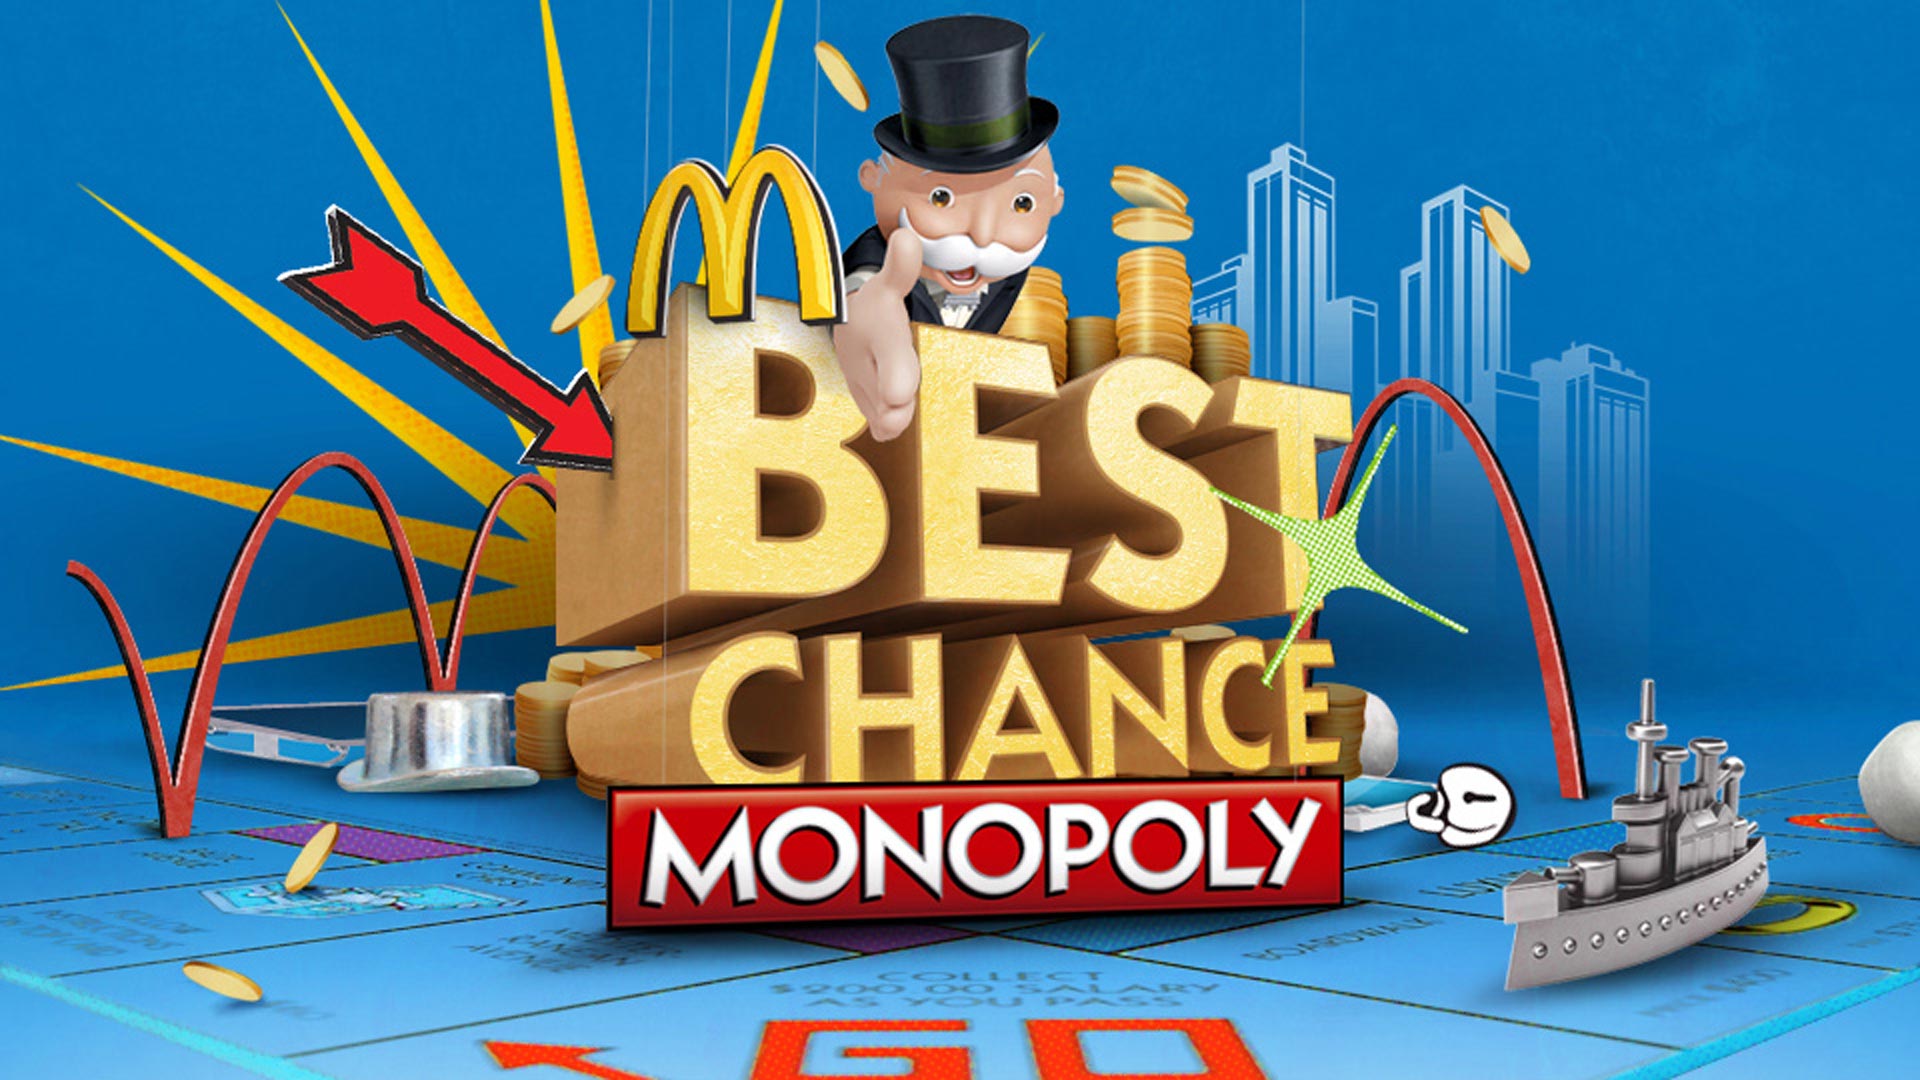 The mcdonald’s monopoly game is an example of which type of promotion?